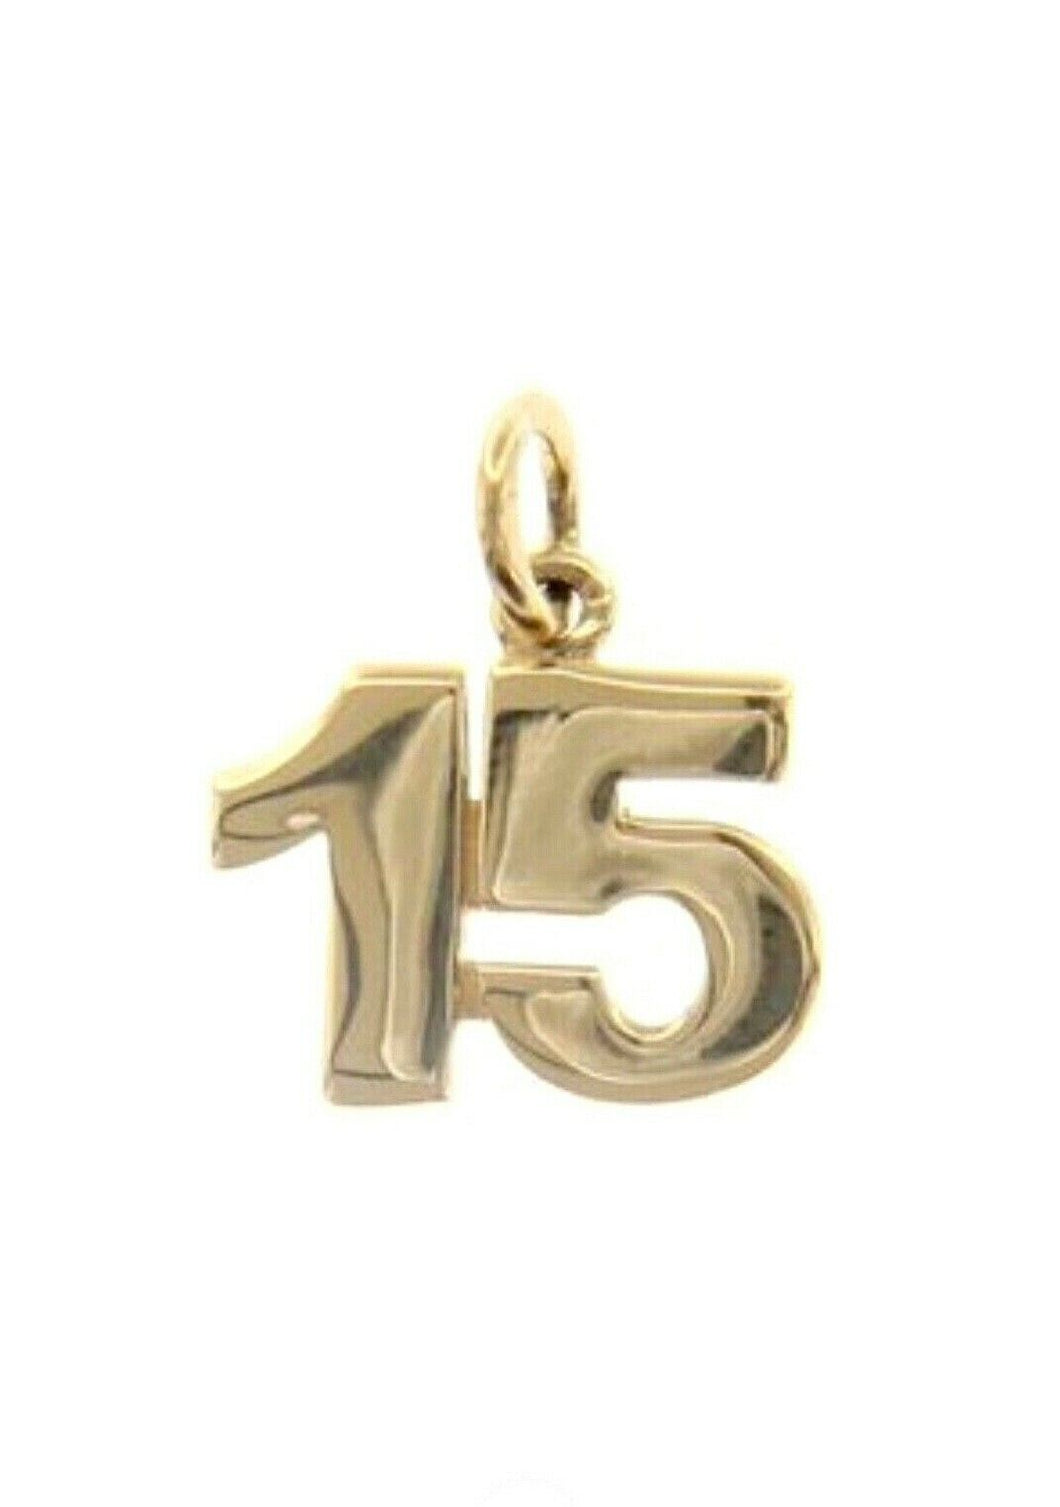 18k yellow gold number 15 fifteen small pendant charm, 0.4